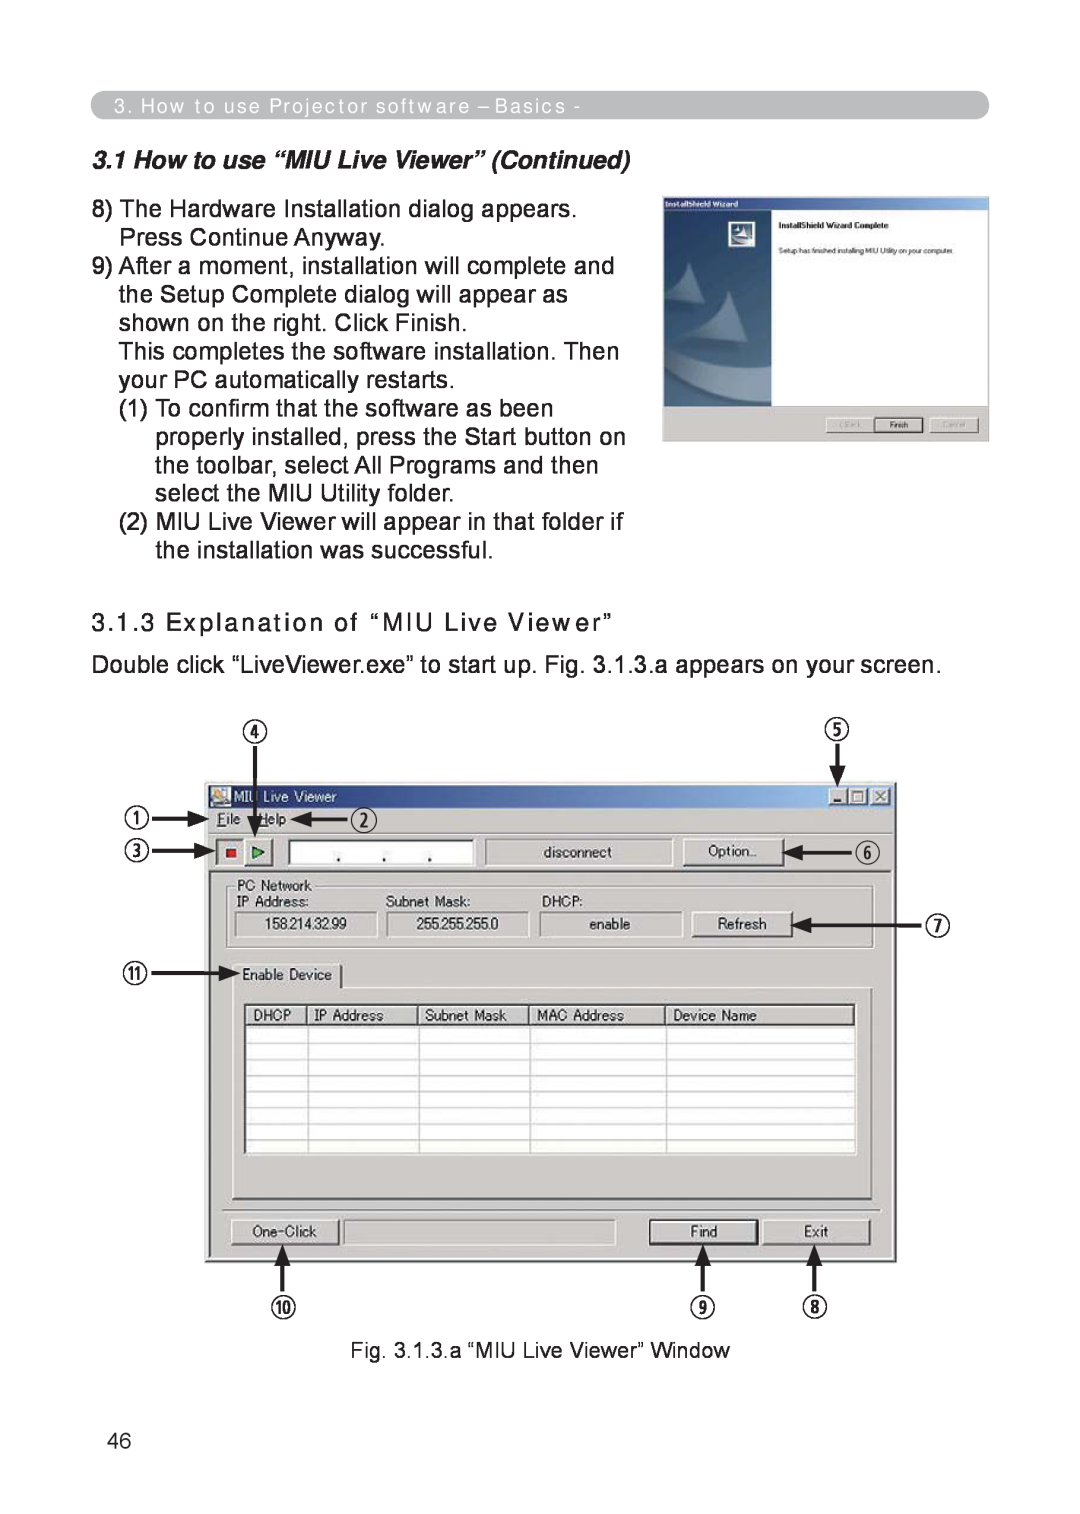 3M X62w manual qe s, How to use “MIU Live Viewer” Continued, Explanation of “MIU Live Viewer” 